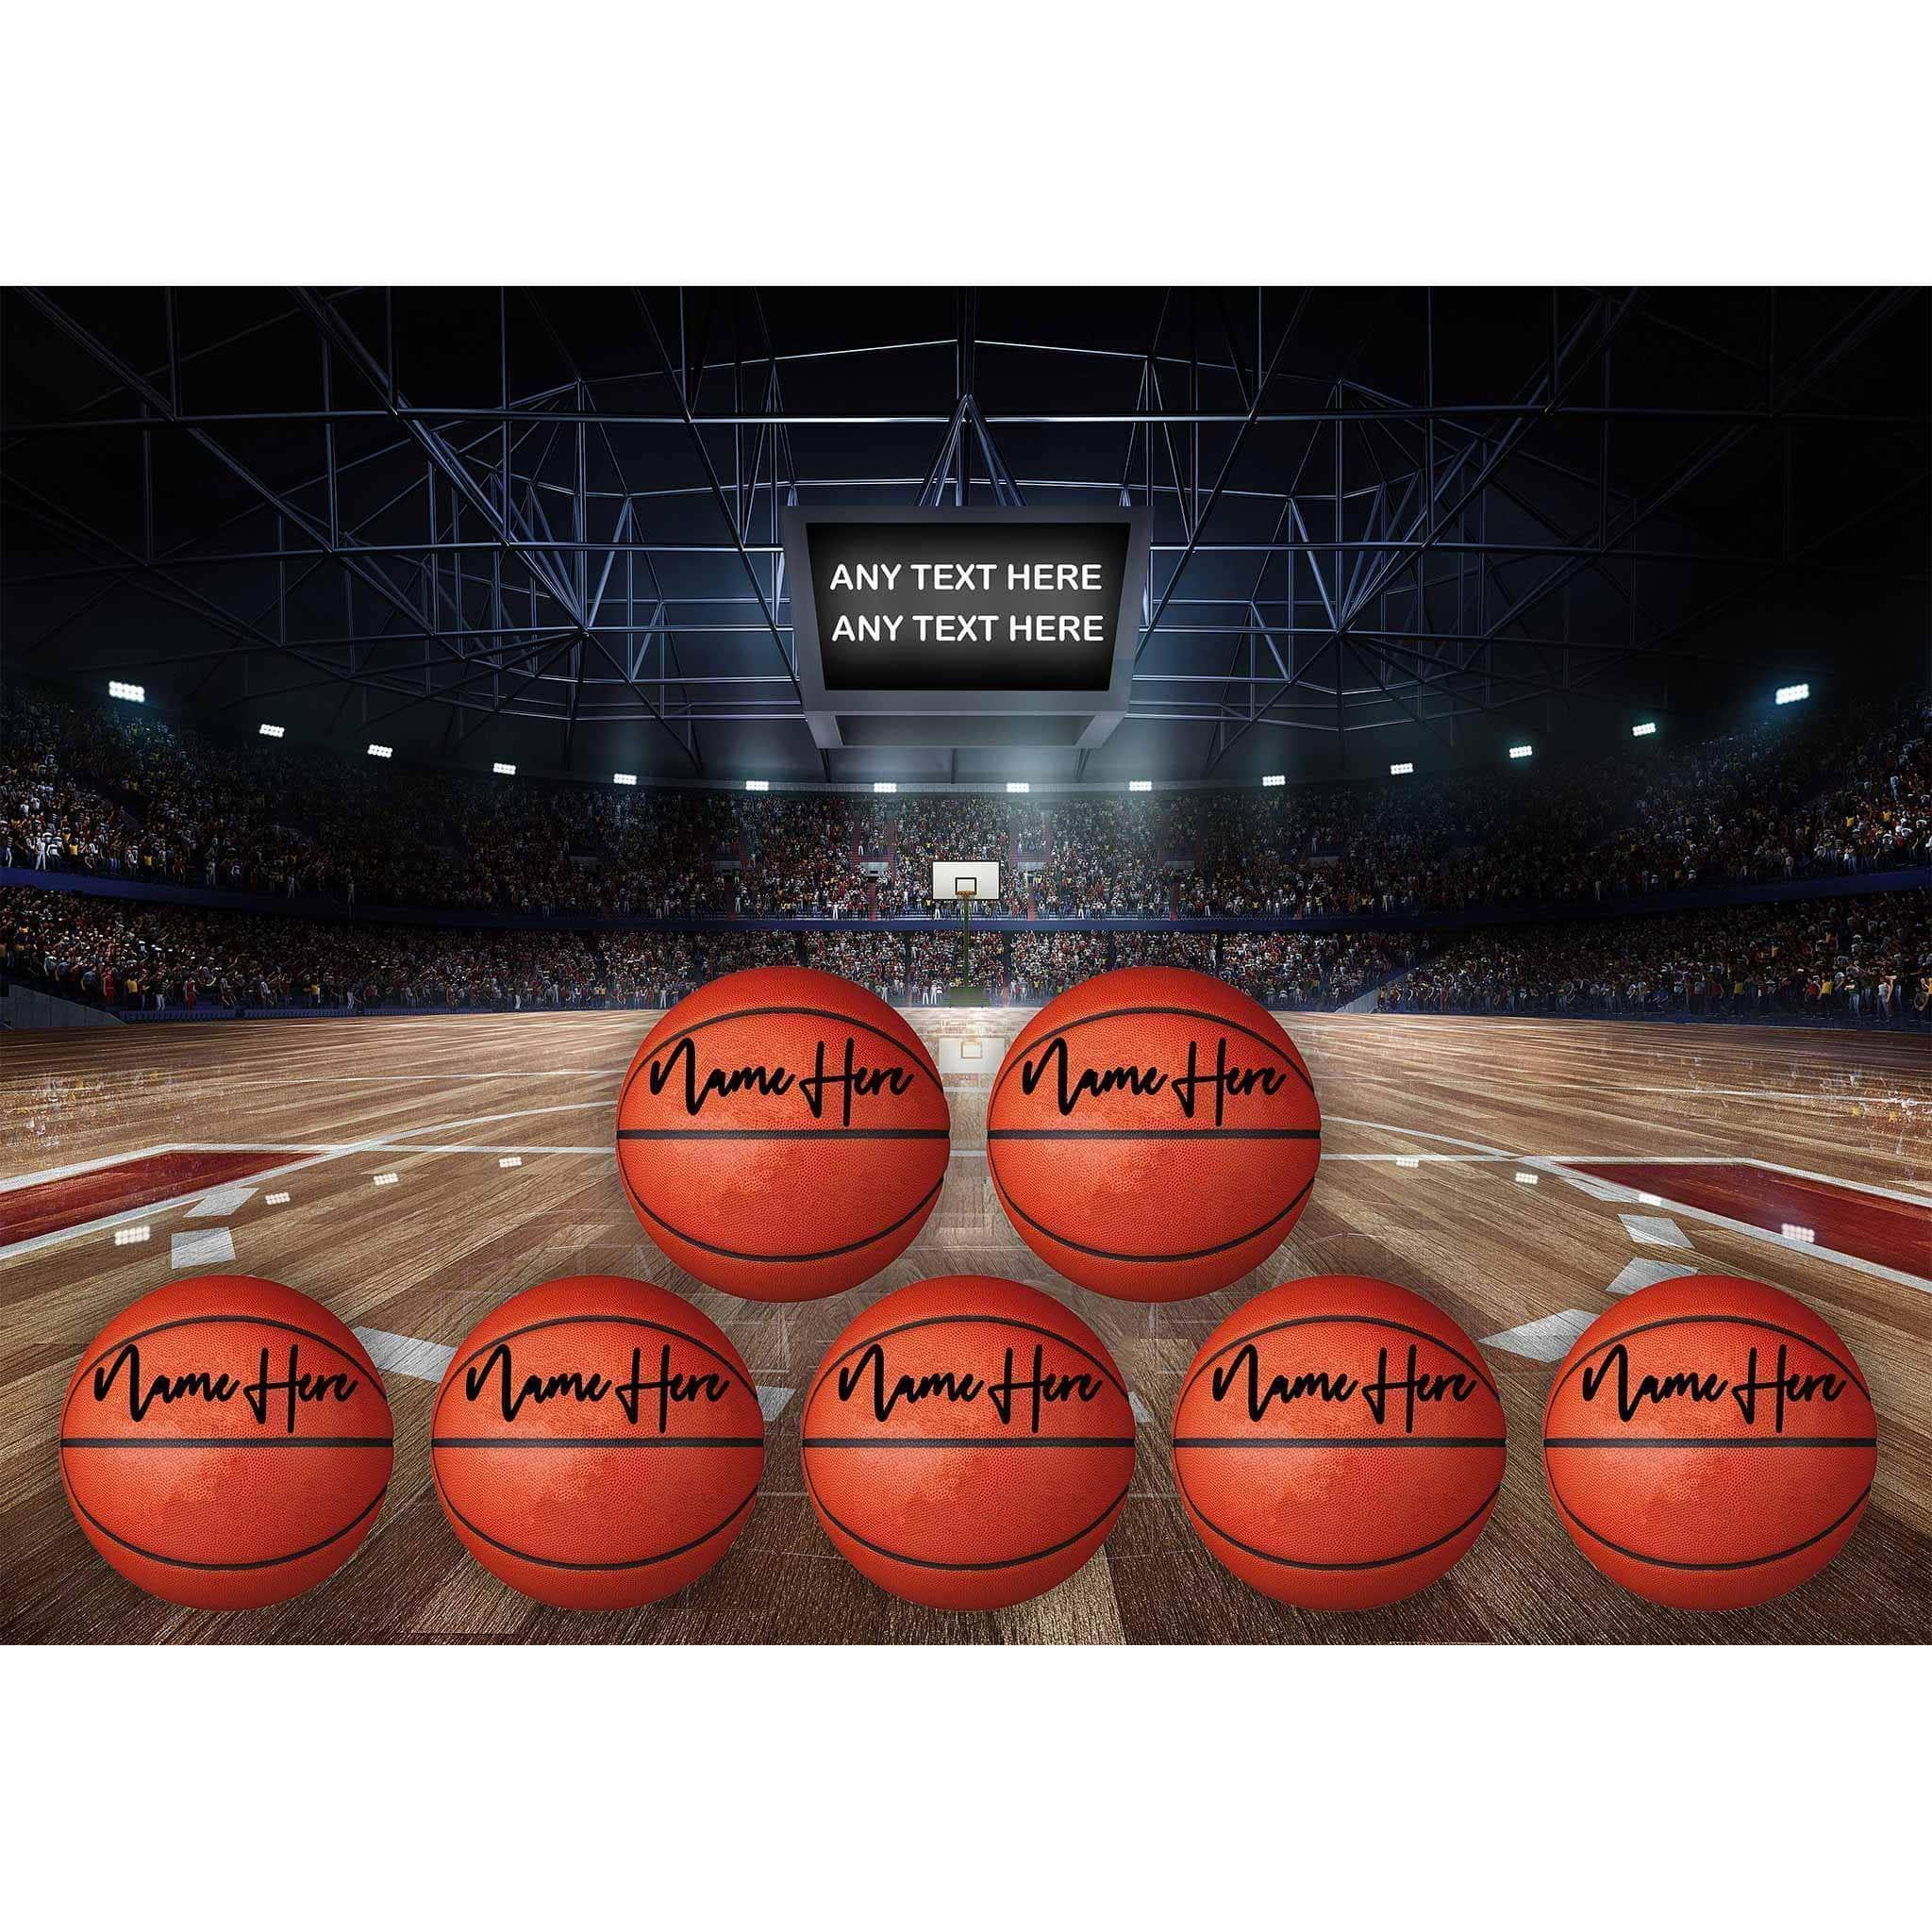 Basketball Arena V1 Multiple Names Personalized Basketballs And Scoreboard  Sign Canvas